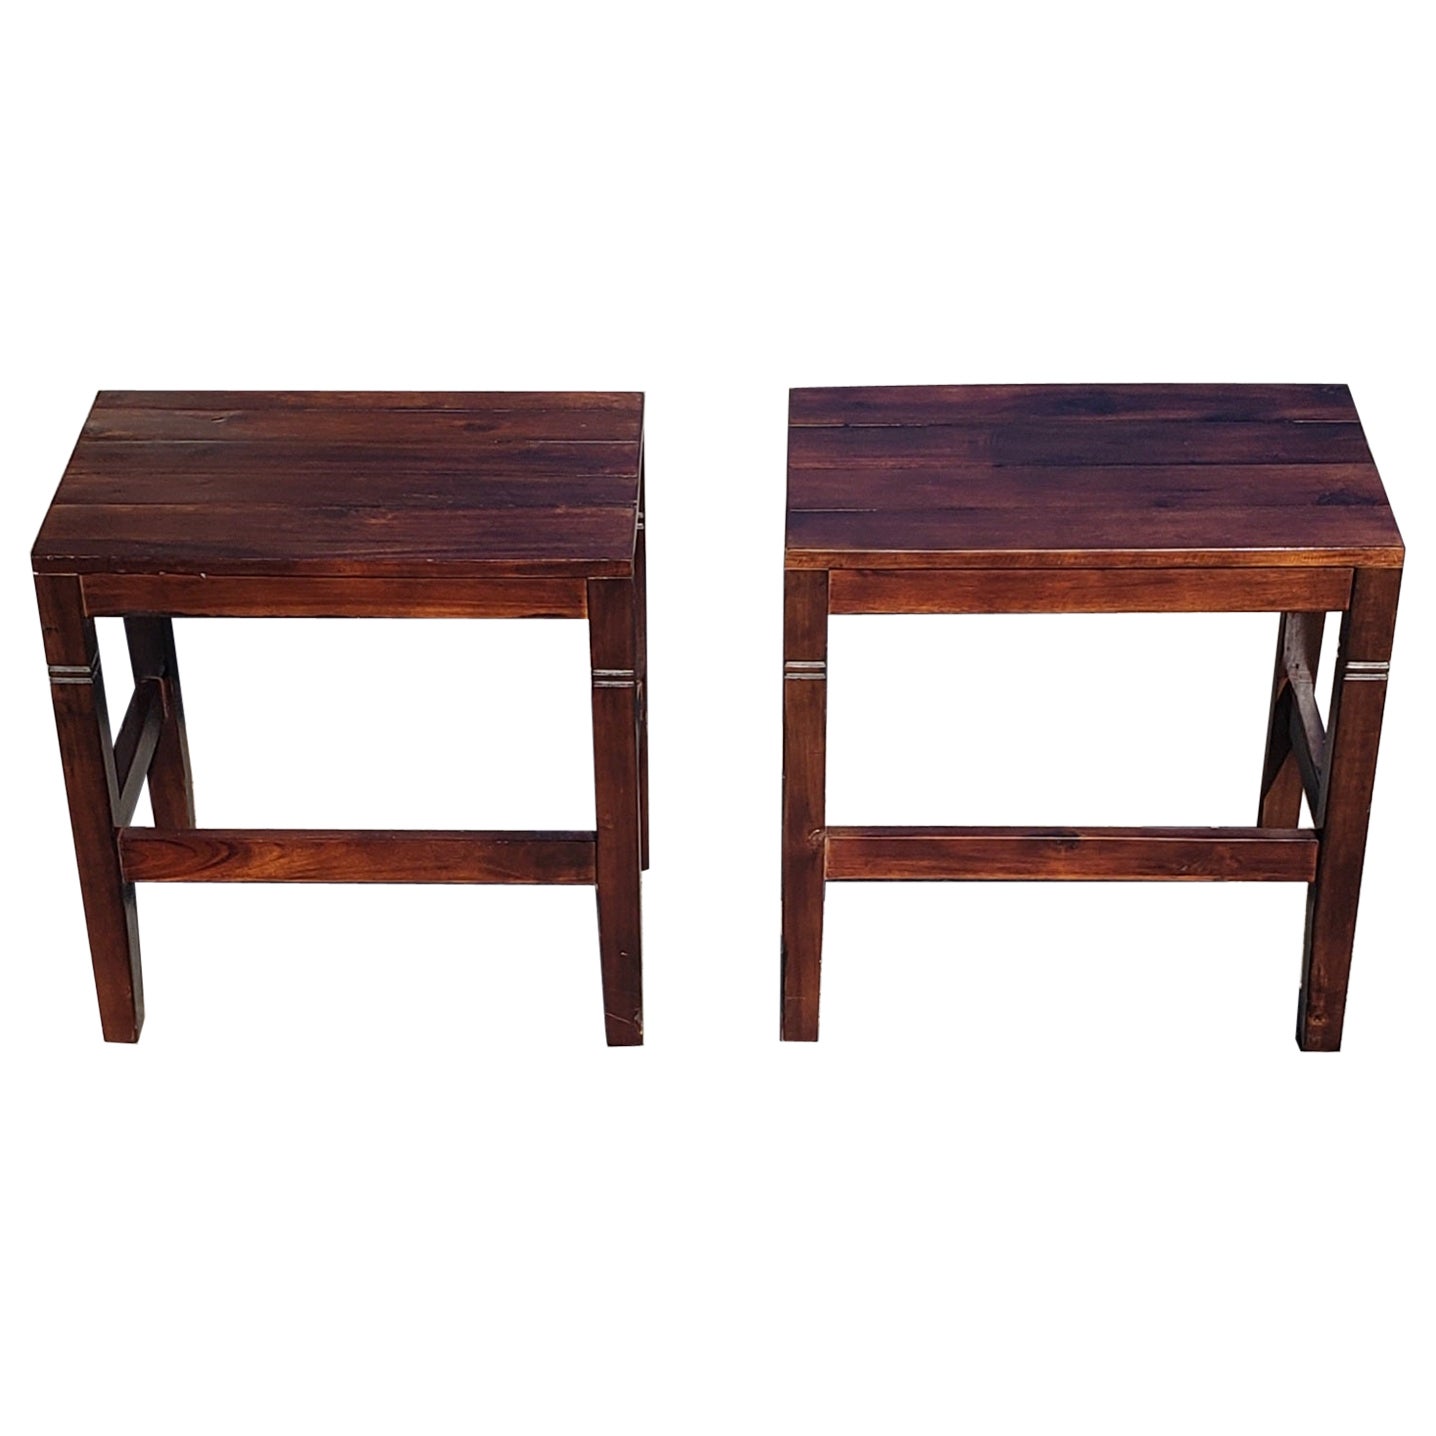 Solid Walnut Rectangular Side Tables, a Pair